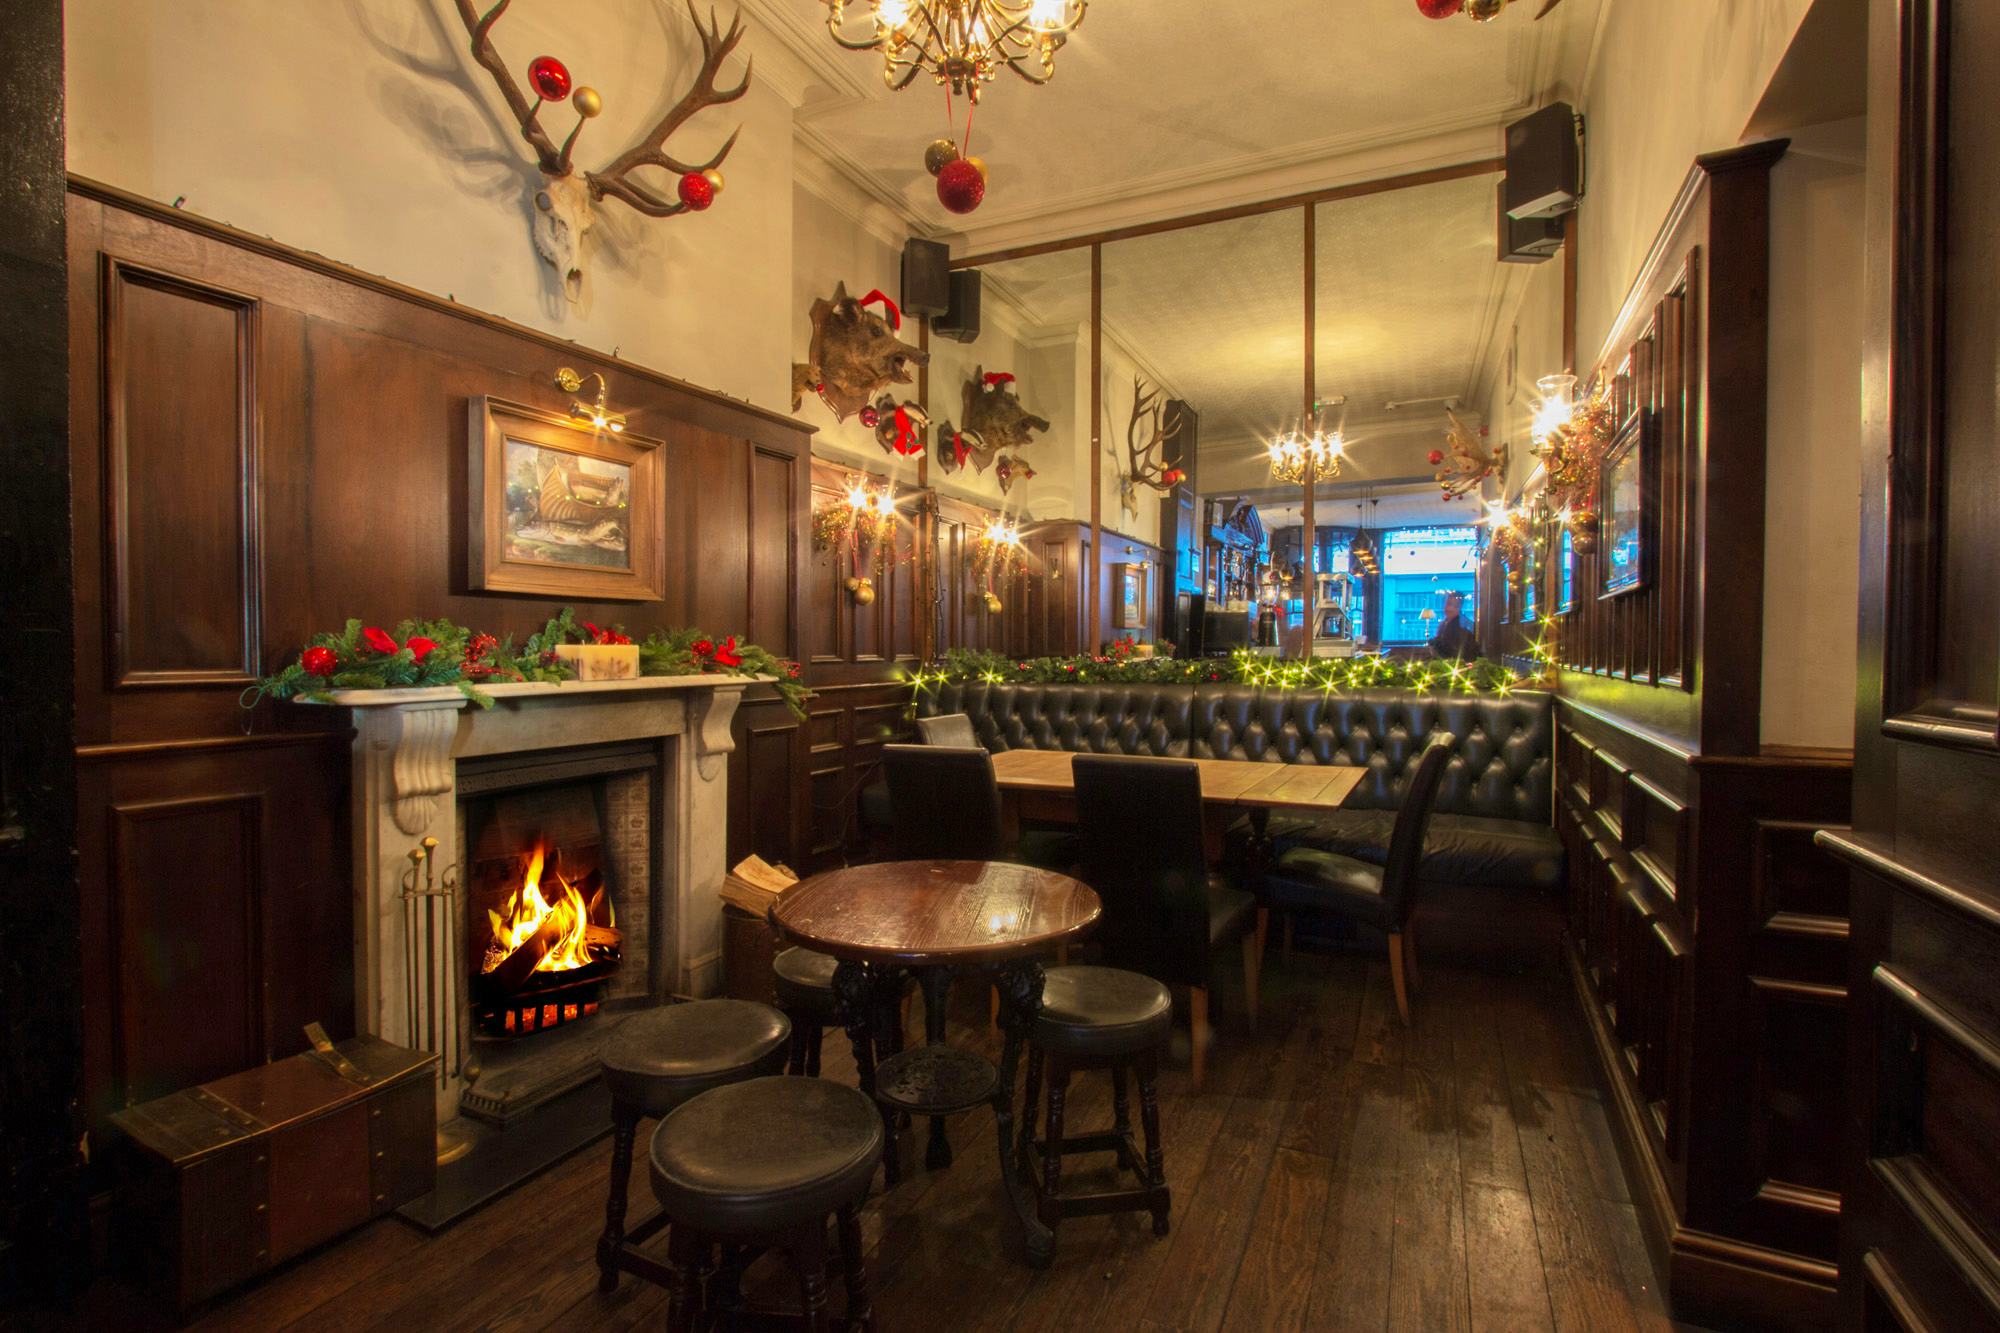 Squaremeal Venues and Events Emeal 11 August 2016 - chiswell street dining rooms christmas